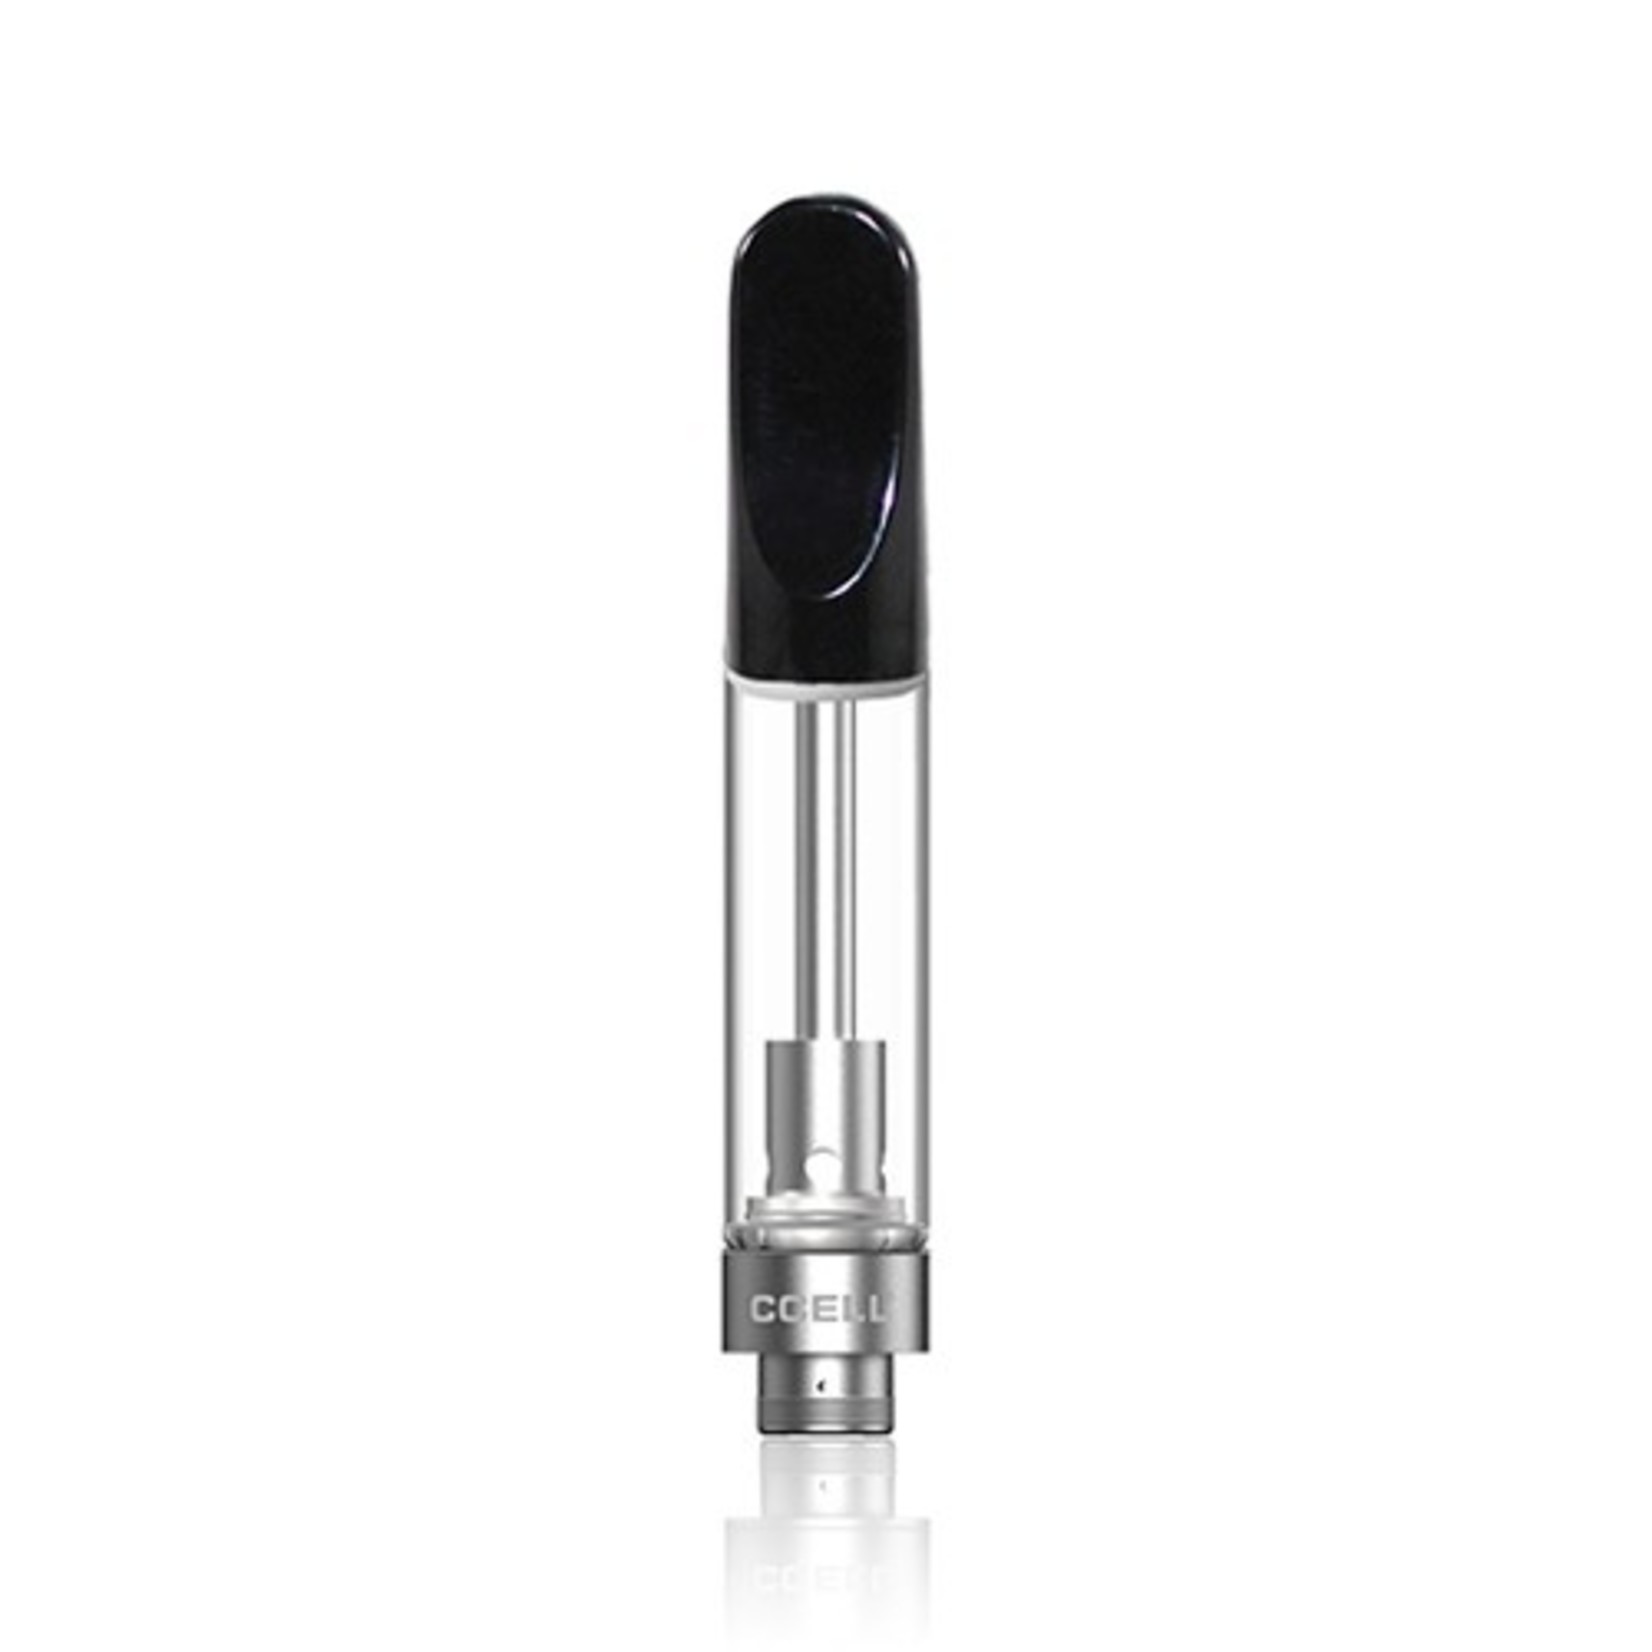 Hamilton Devices 1ml CCELL Disposable Tank